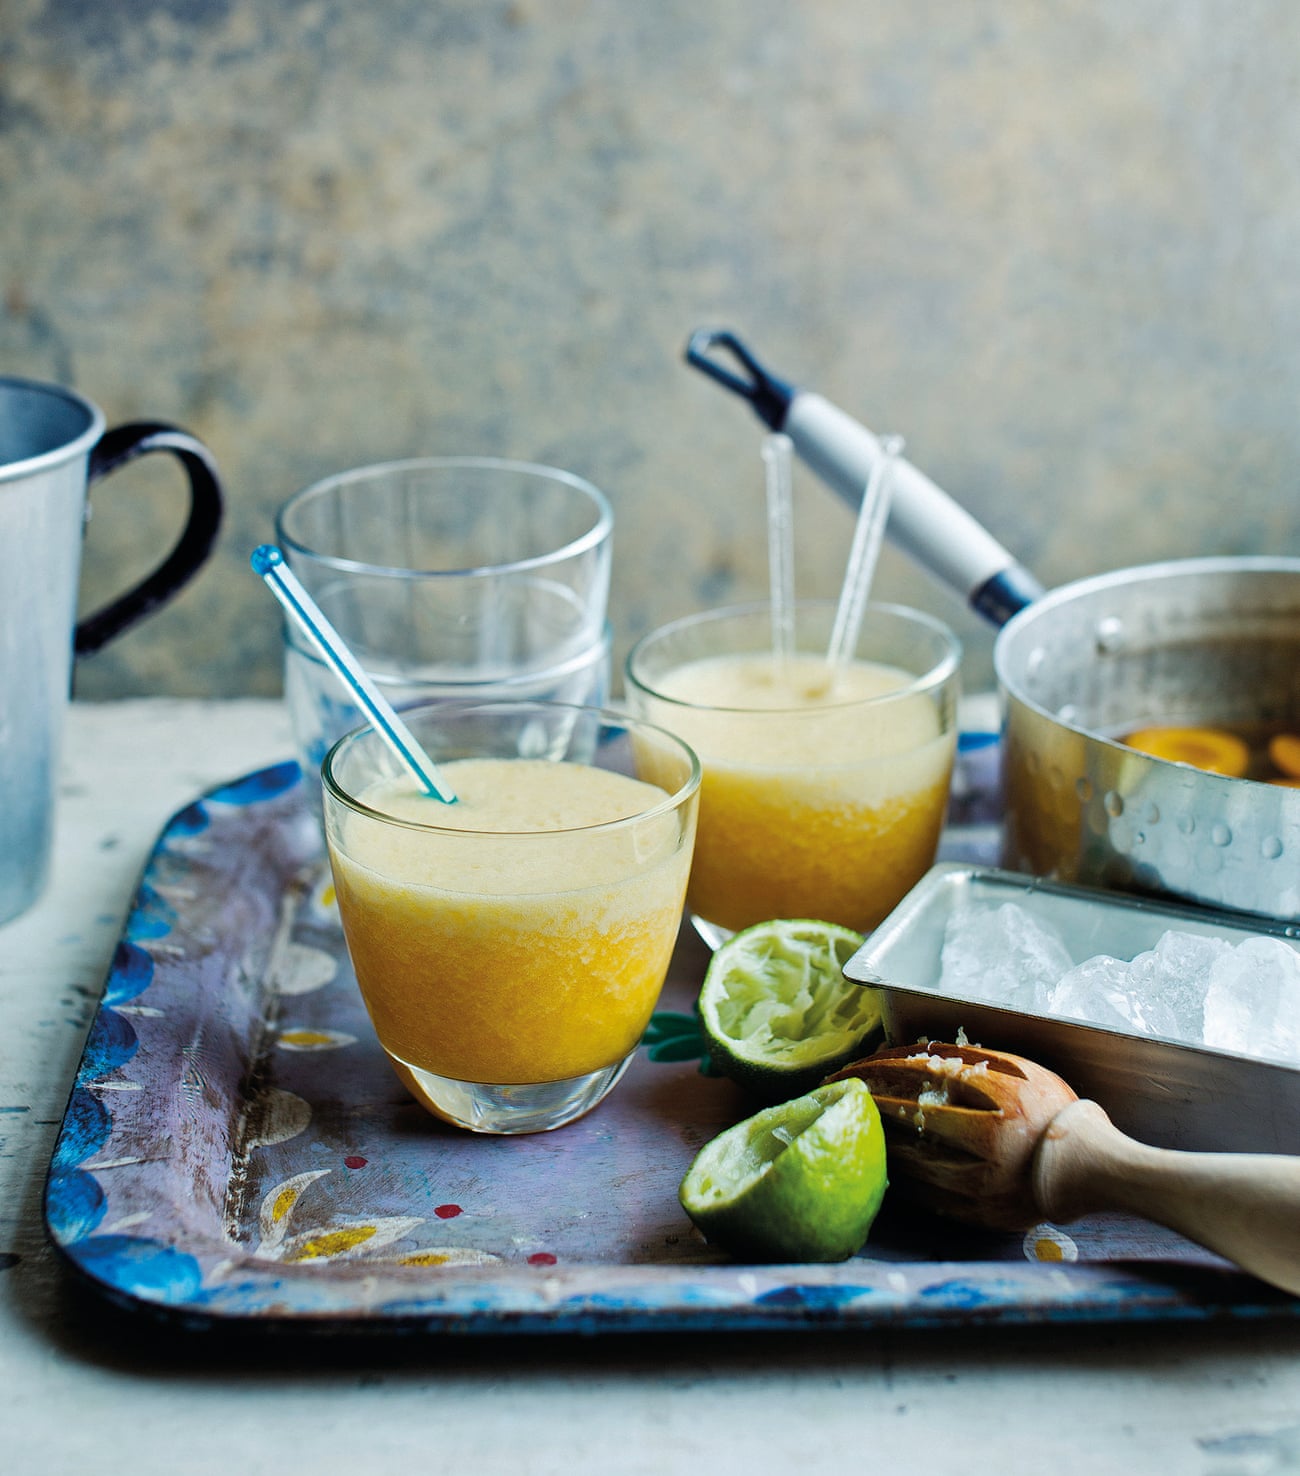 Tom Hunt's stone fruit daiquiri is a great way to use up overripe peaches.